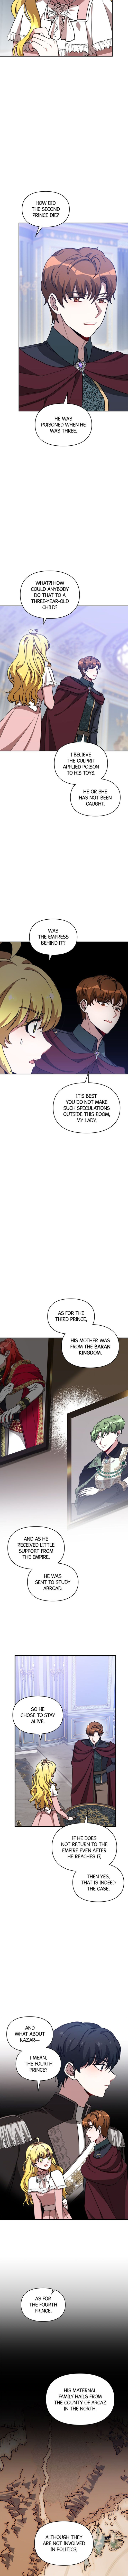 The Forgotten Princess Wants To Live In Peace Chapter 45 page 6